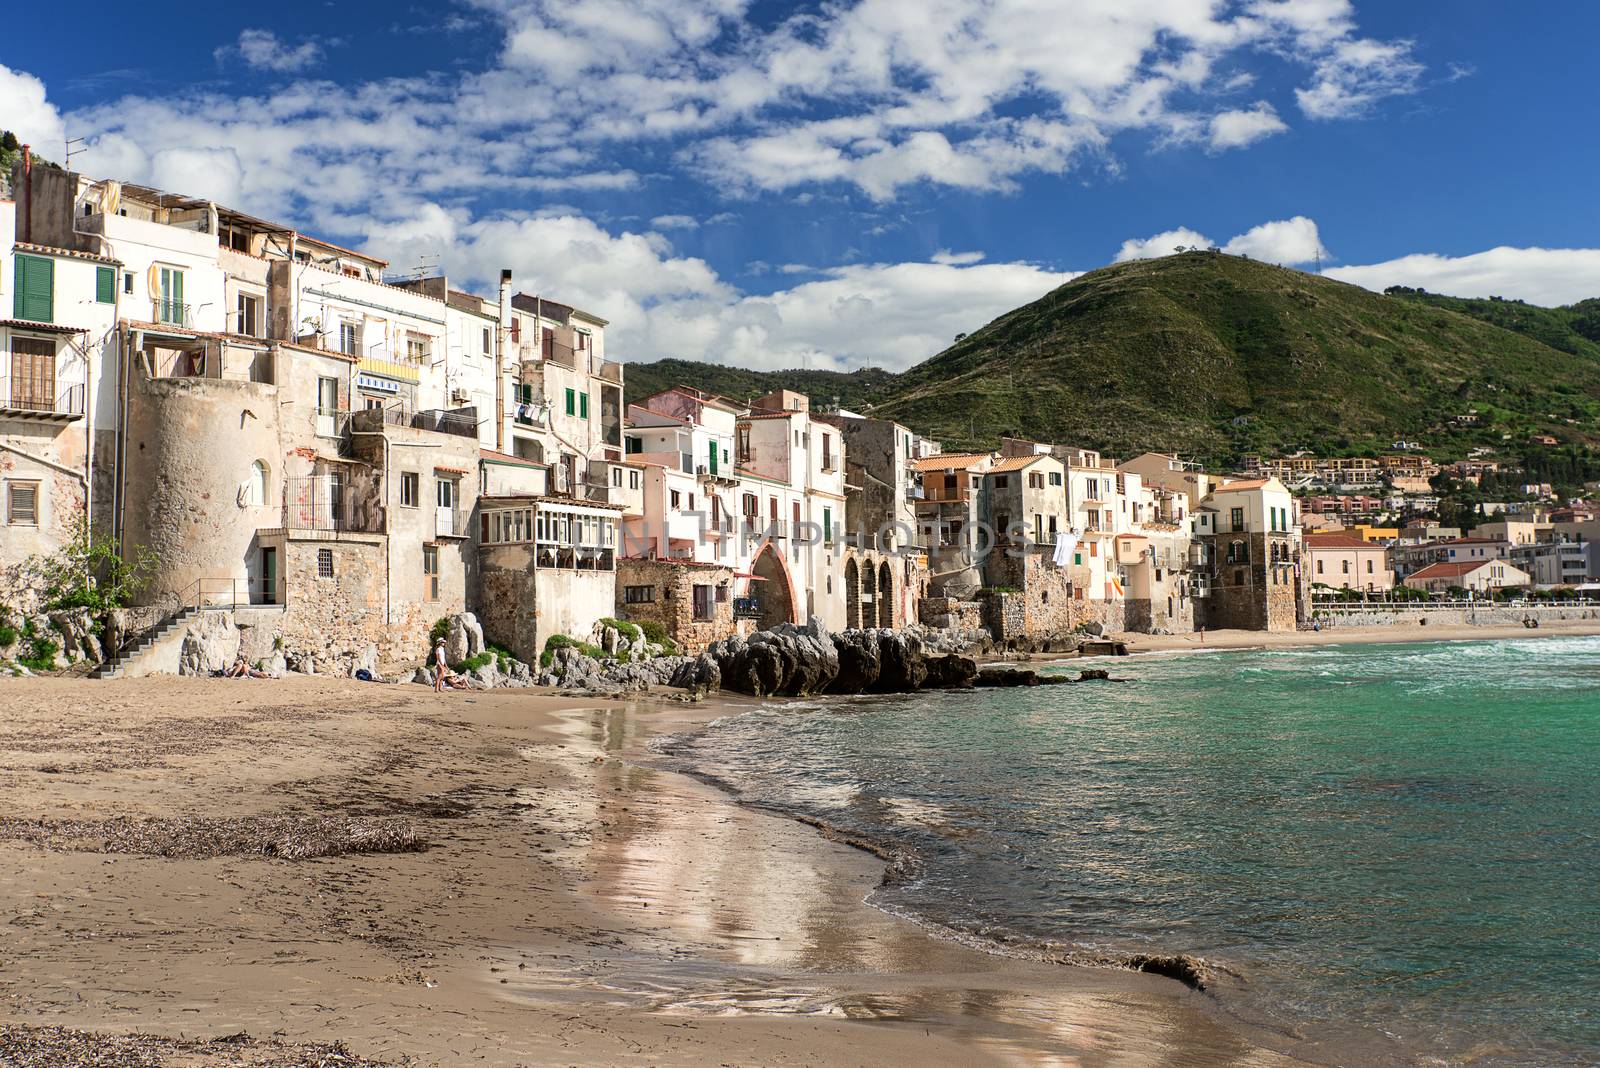 CEFALU, ITALY - APRIL 17, 2014: CEFALU, ITALY - AUGUST 23: Unidentified people at beach in Cefalu, Sicily, Italy. Cefalu is an attractive historic town and seaside resort.